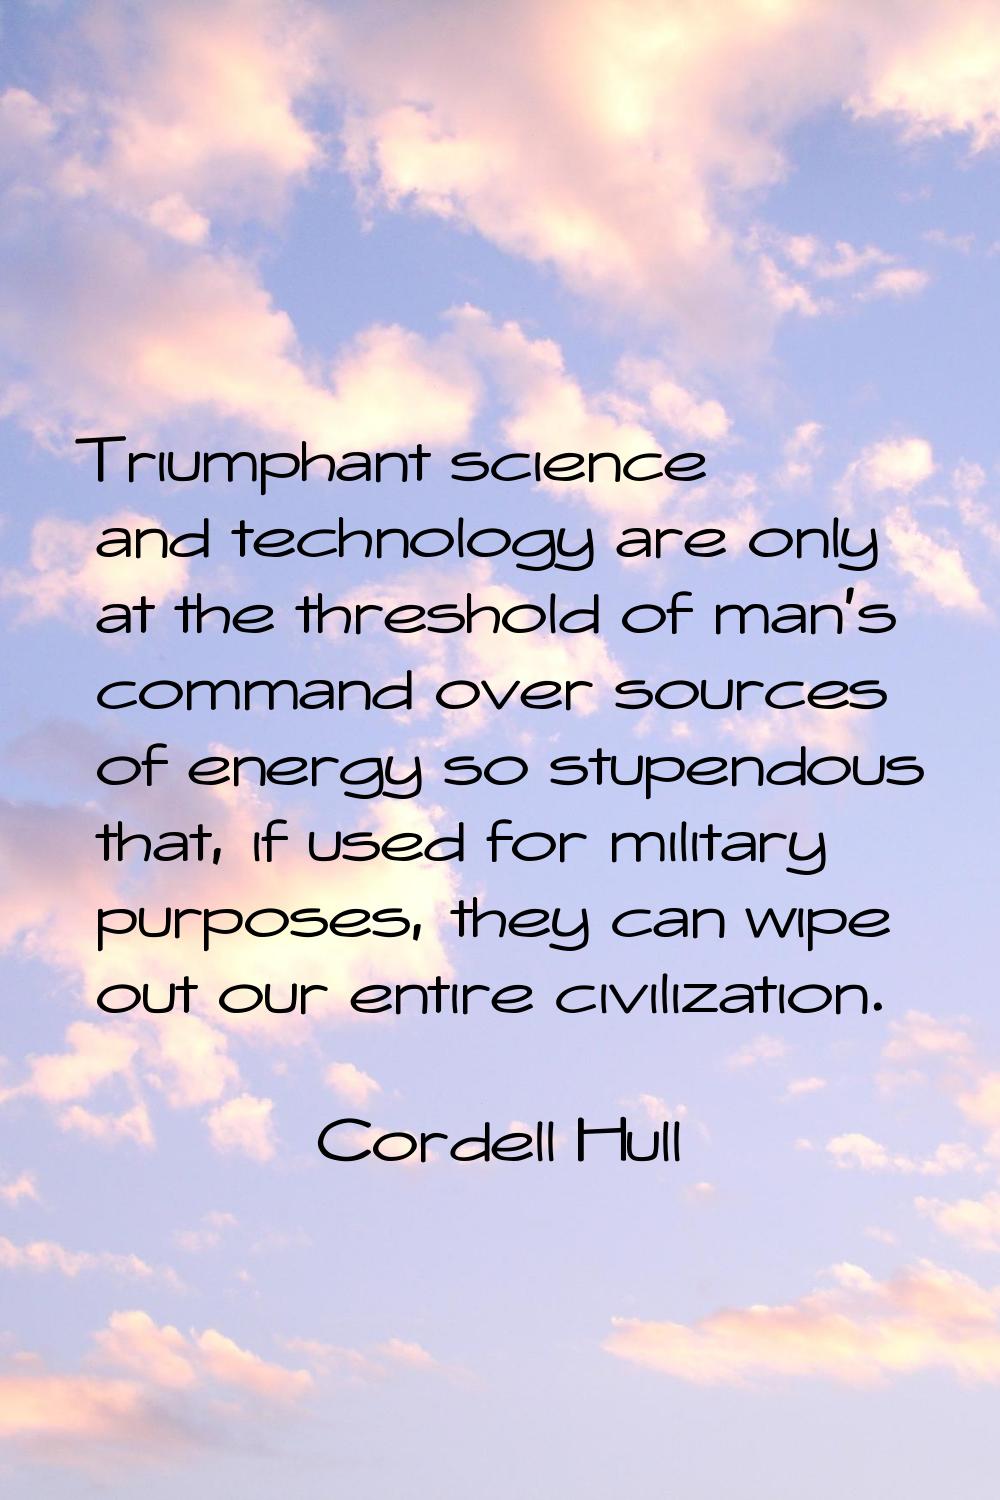 Triumphant science and technology are only at the threshold of man's command over sources of energy